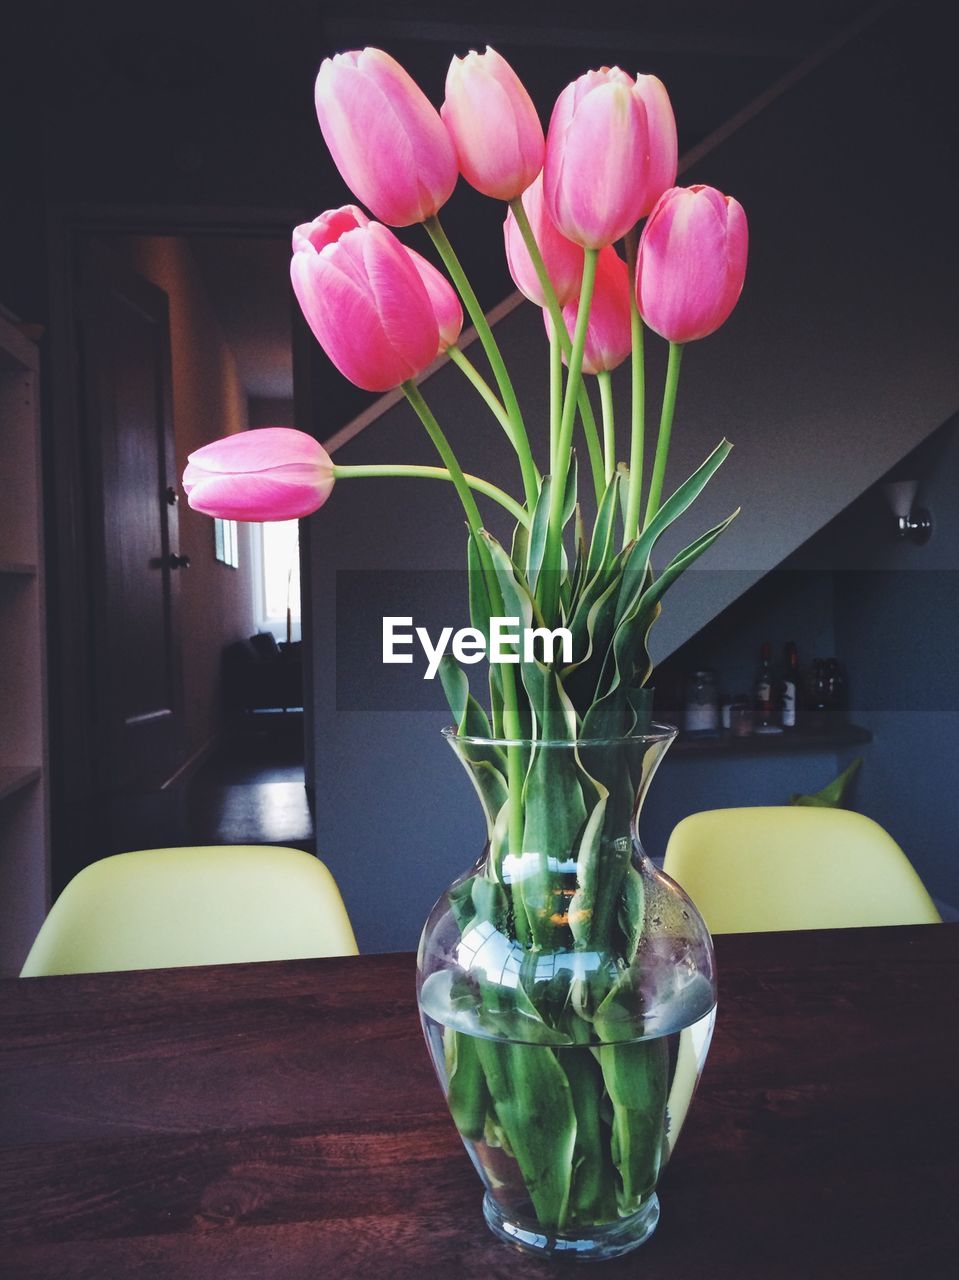 Tulips in vase on table at home